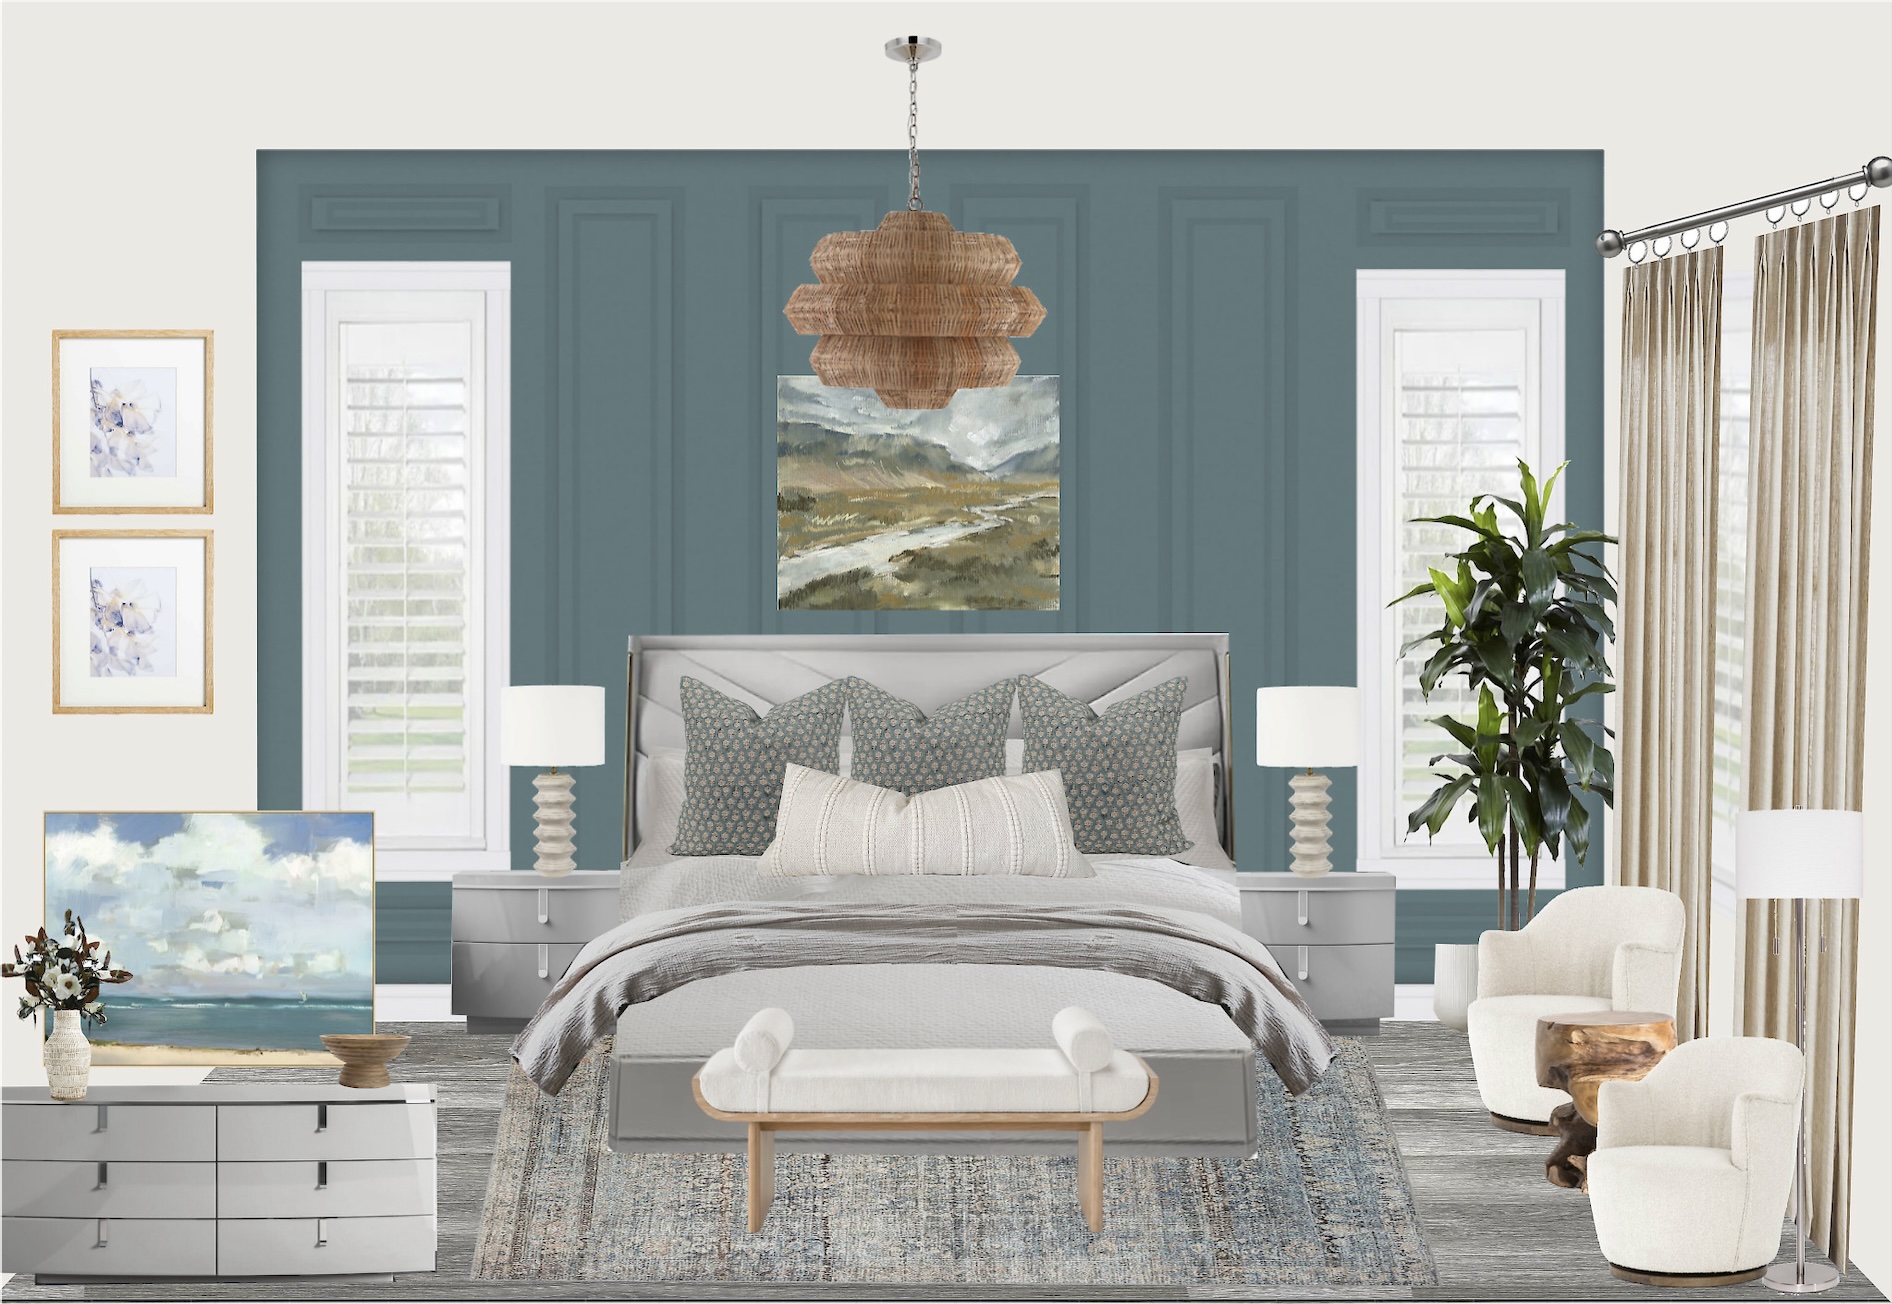 This digital design was created for a client who wanted to revamp their master bedroom. It shows furniture selections and arrangements of how everything will be placed in the space so the client can see the vision for the room.<br />
